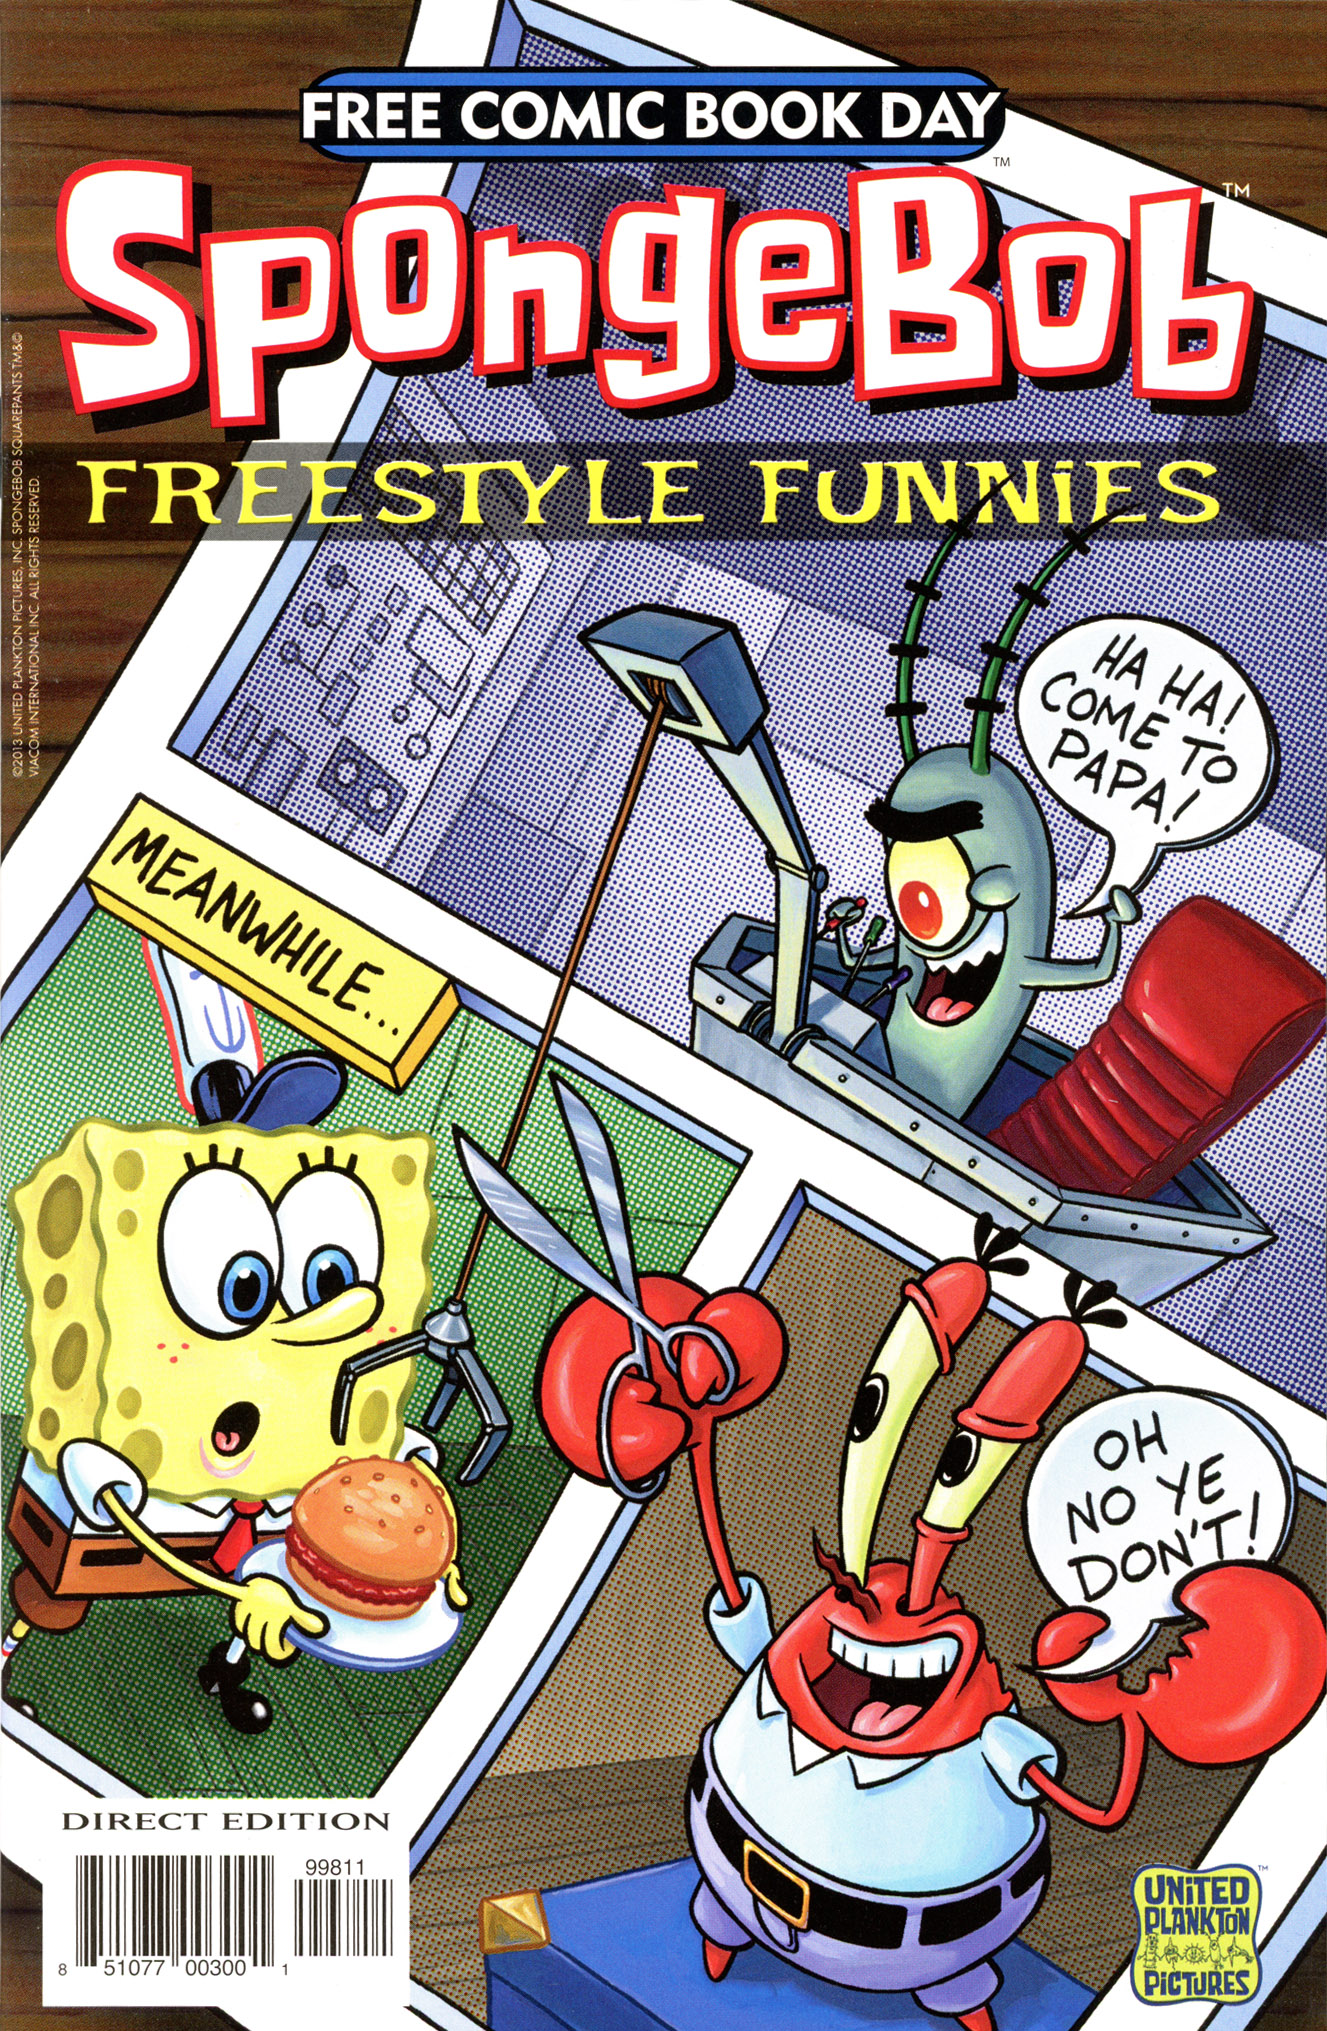 Free Comic Book Day 2013: Freestyle Funnies